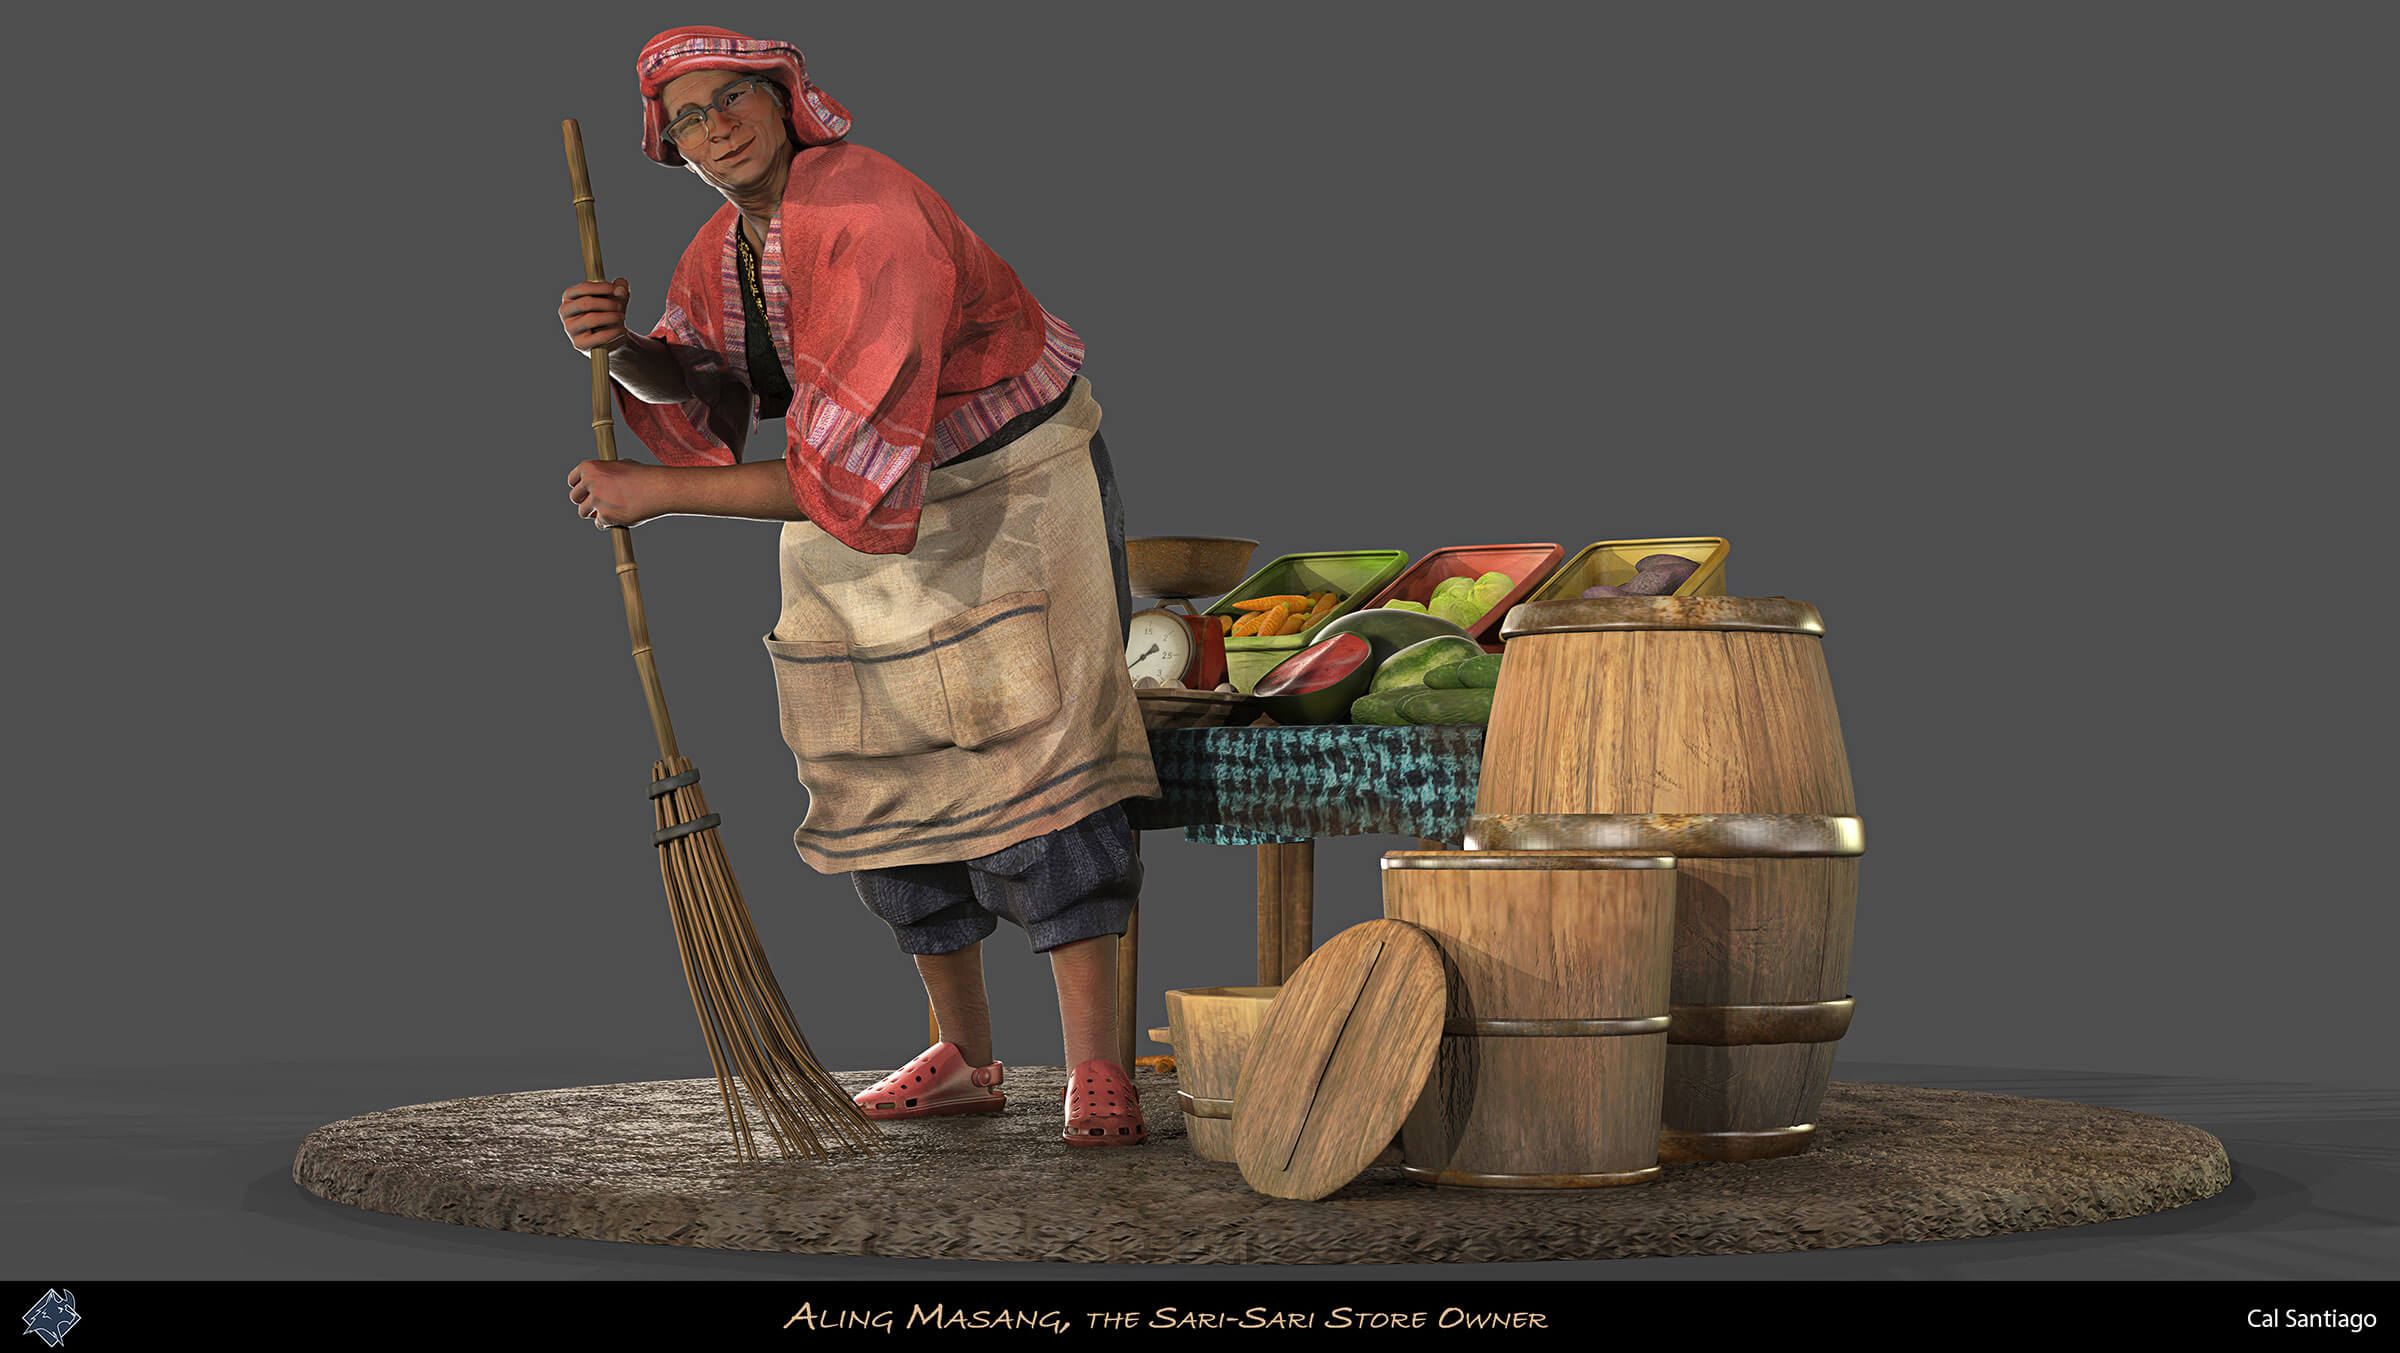 A shopkeeper wearing crocs and a linen apron sweeps with a simple bamboo broom next to a small table of vegetables.